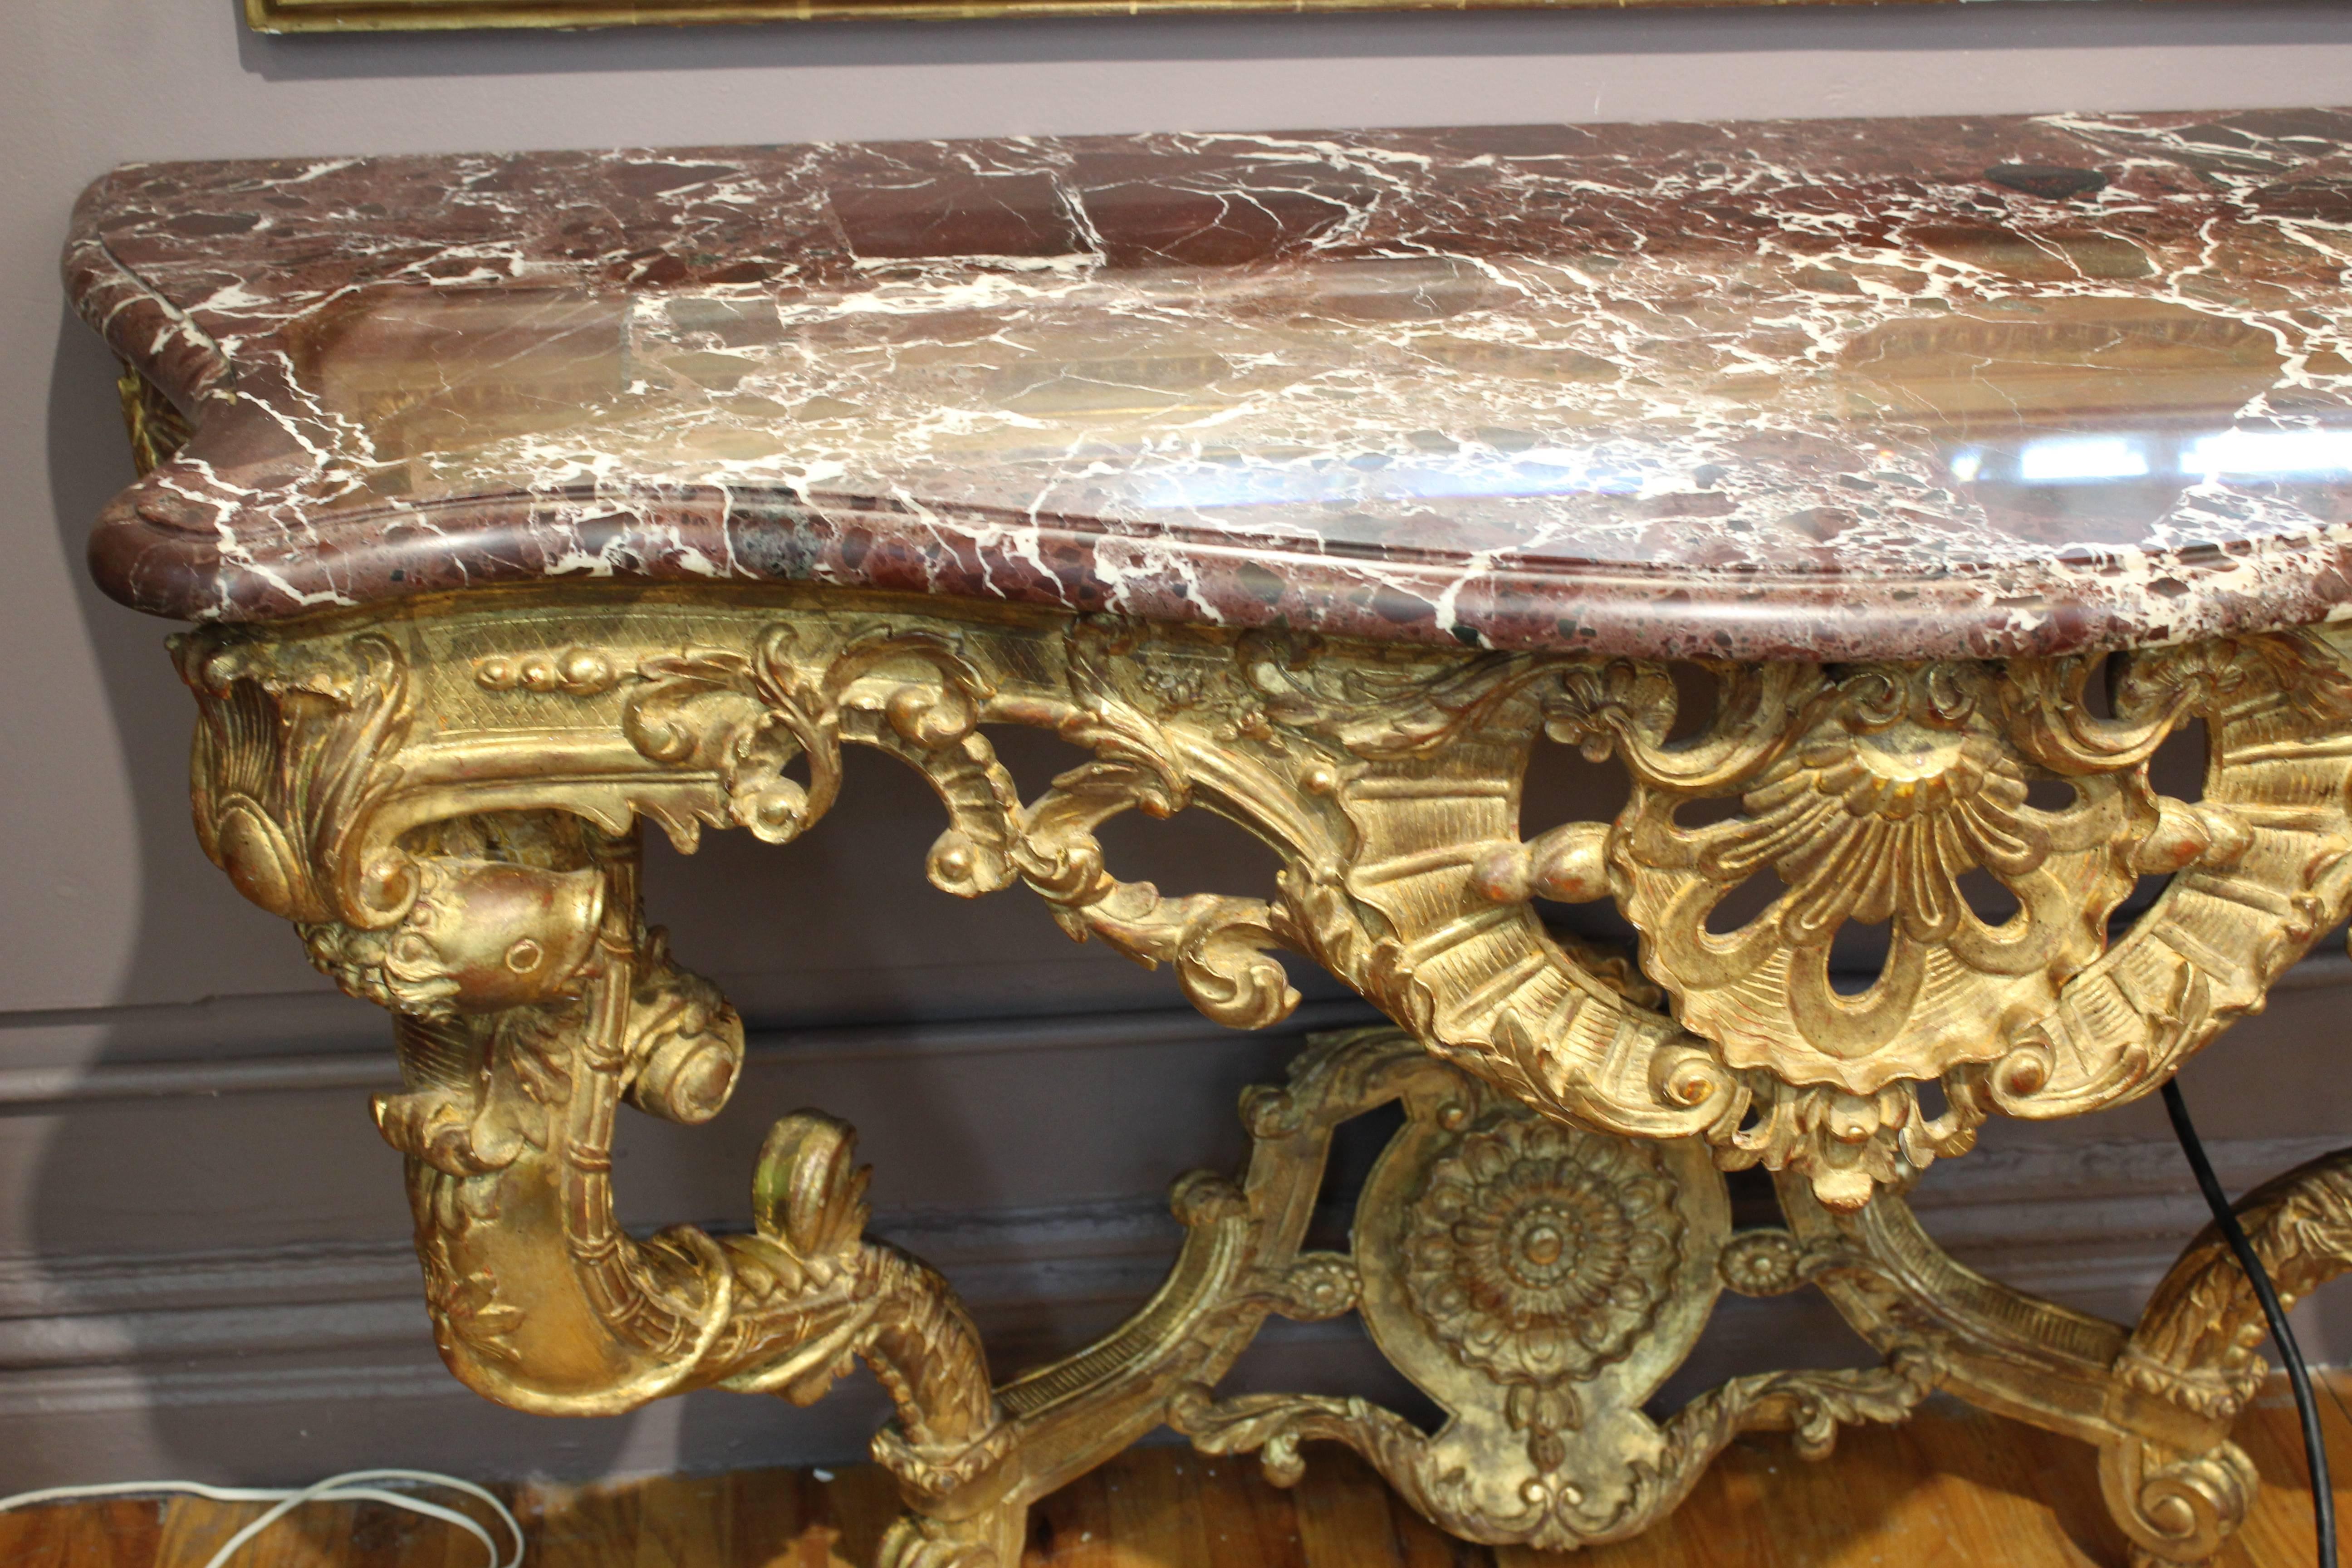 Marble Pair of 19th Century French Rococo Style Consoles, late 19th-early 20th century